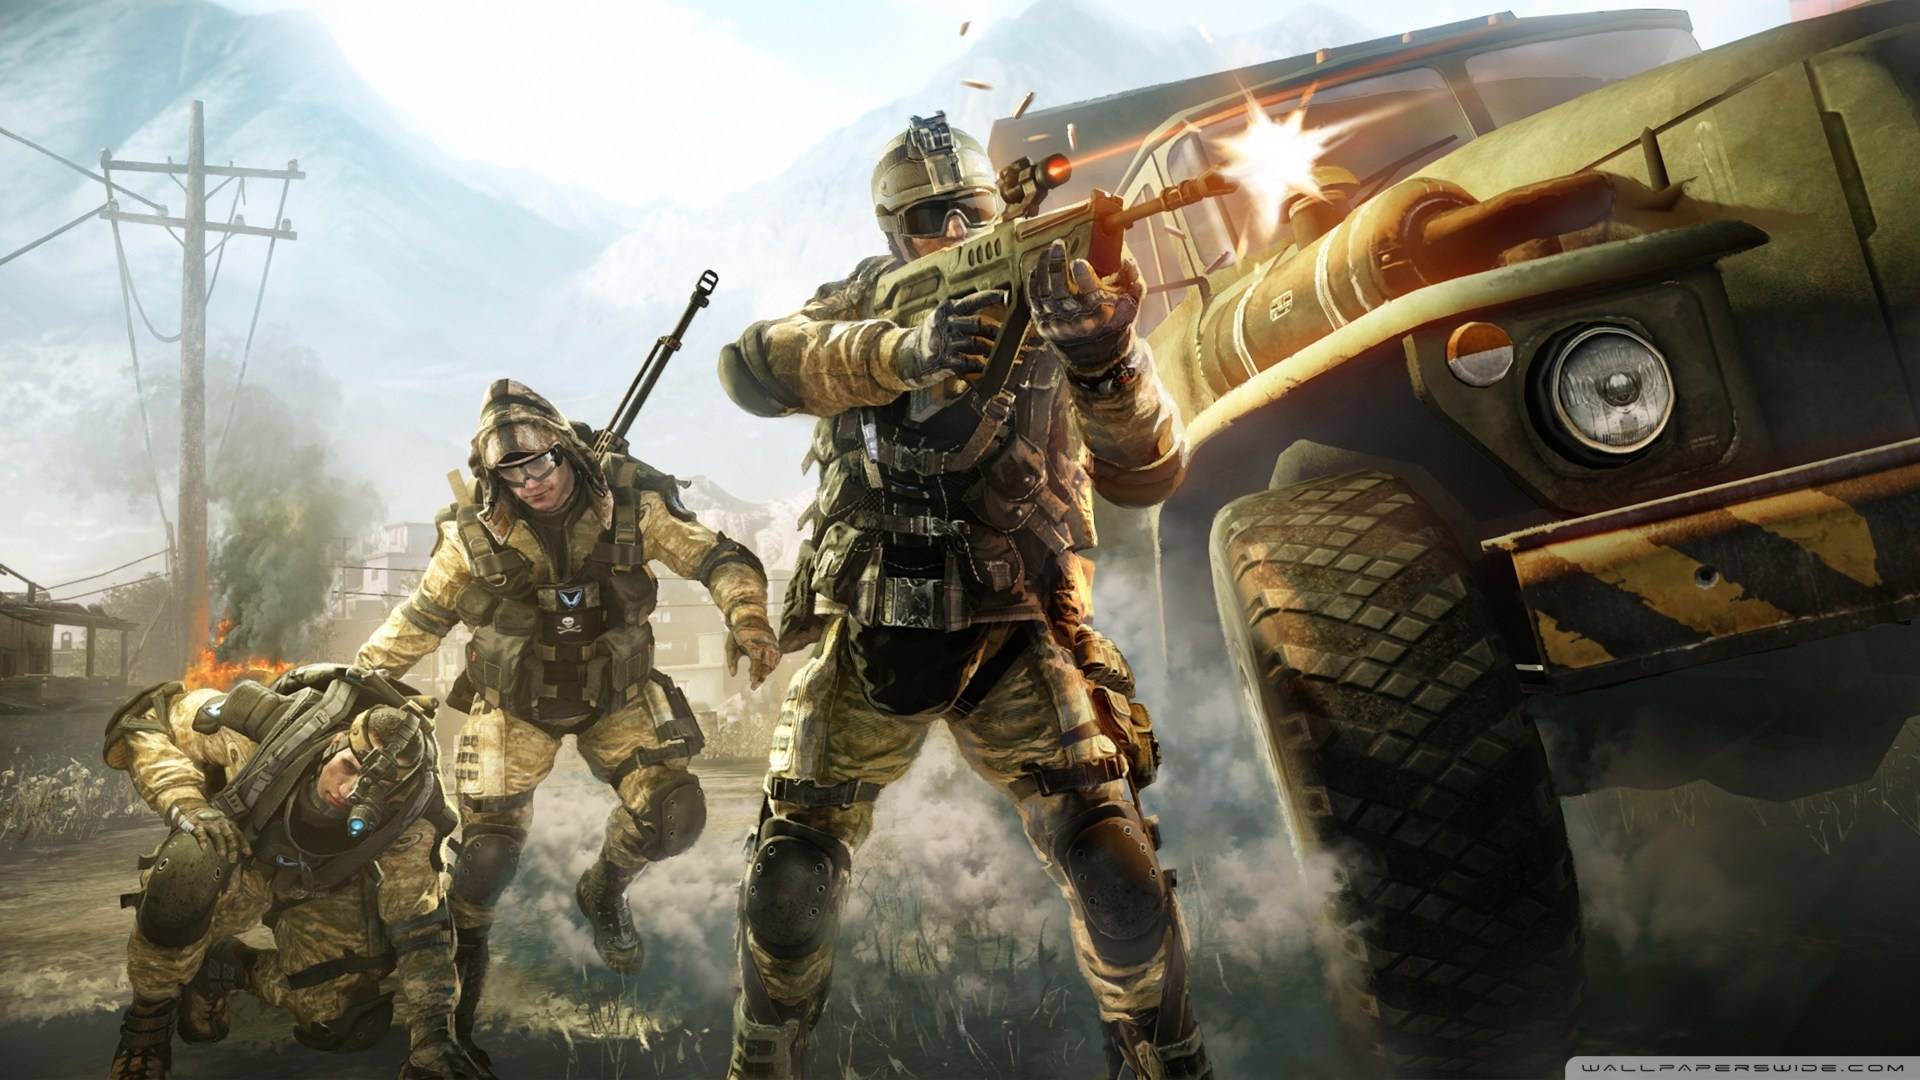 Cryteks free-to-play FPS, Warface, will get a Battle Royale mode